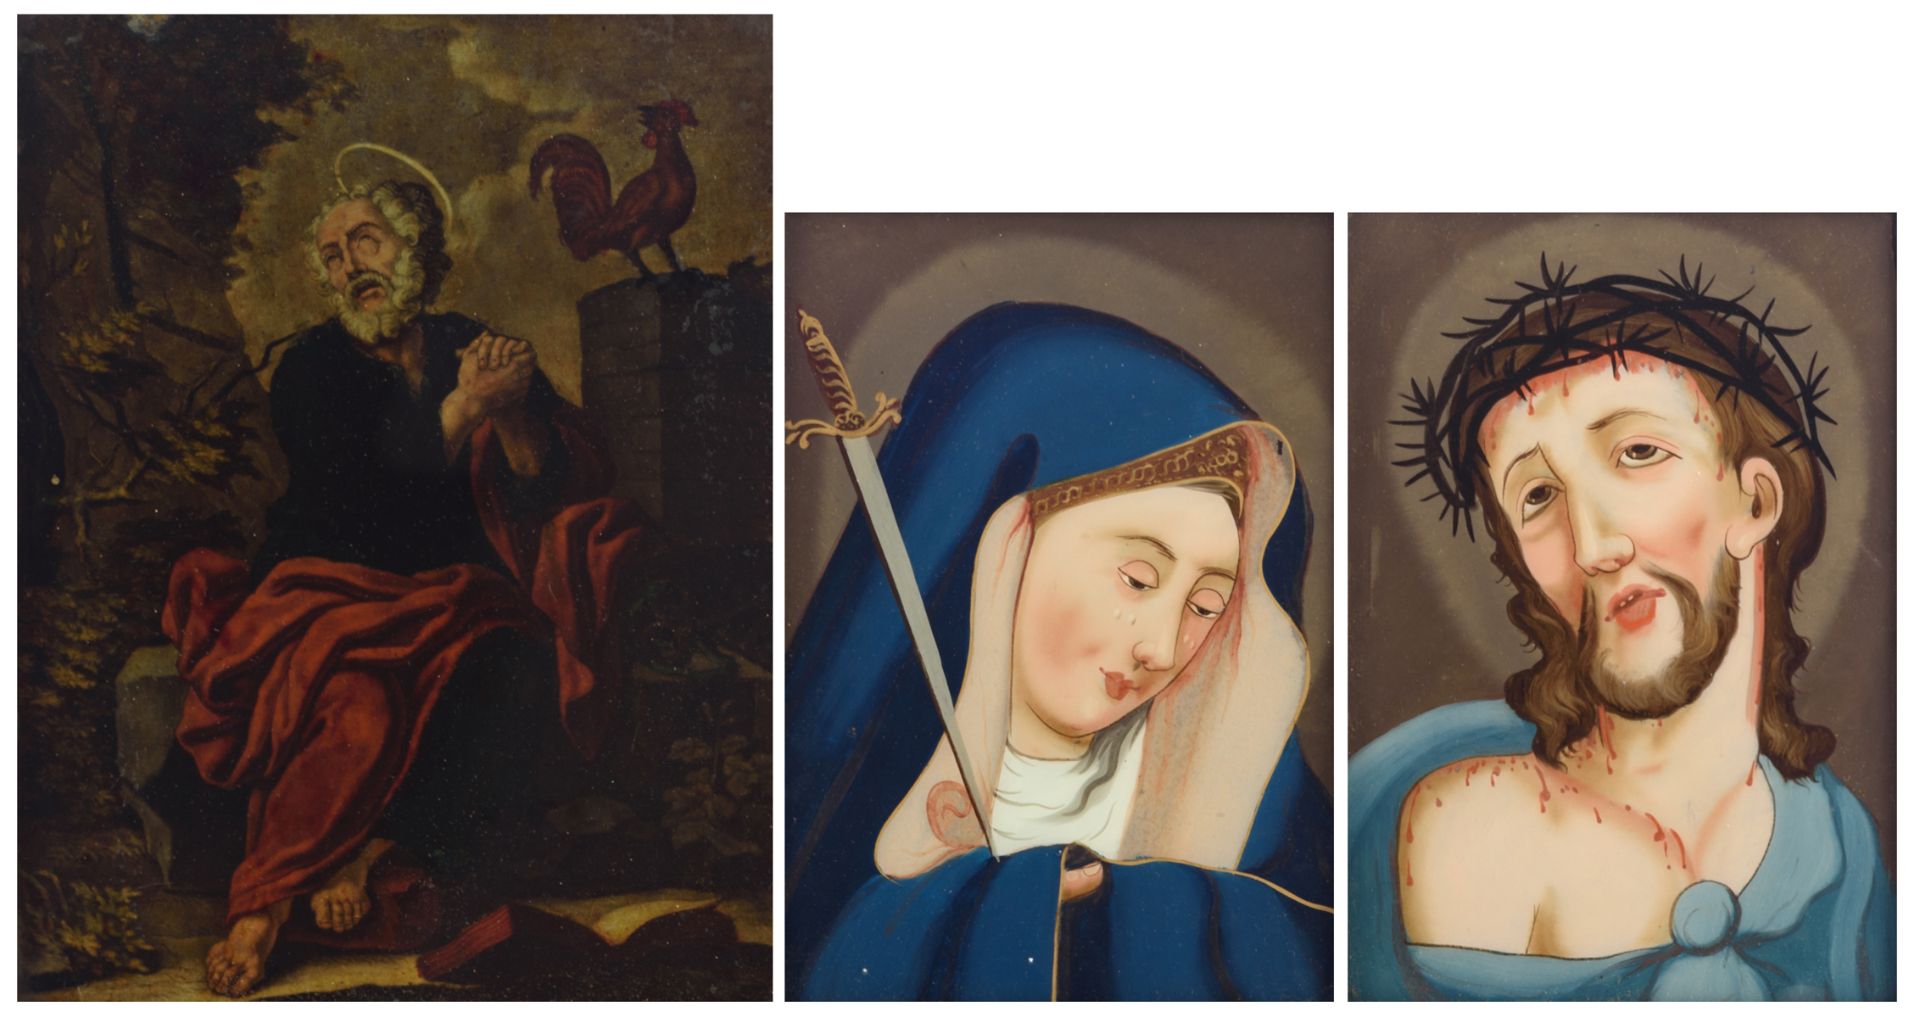 Two early 19thC reverse glass paintings depicting a 'Mater Dolorosa' and an 'Ecce Homo', most